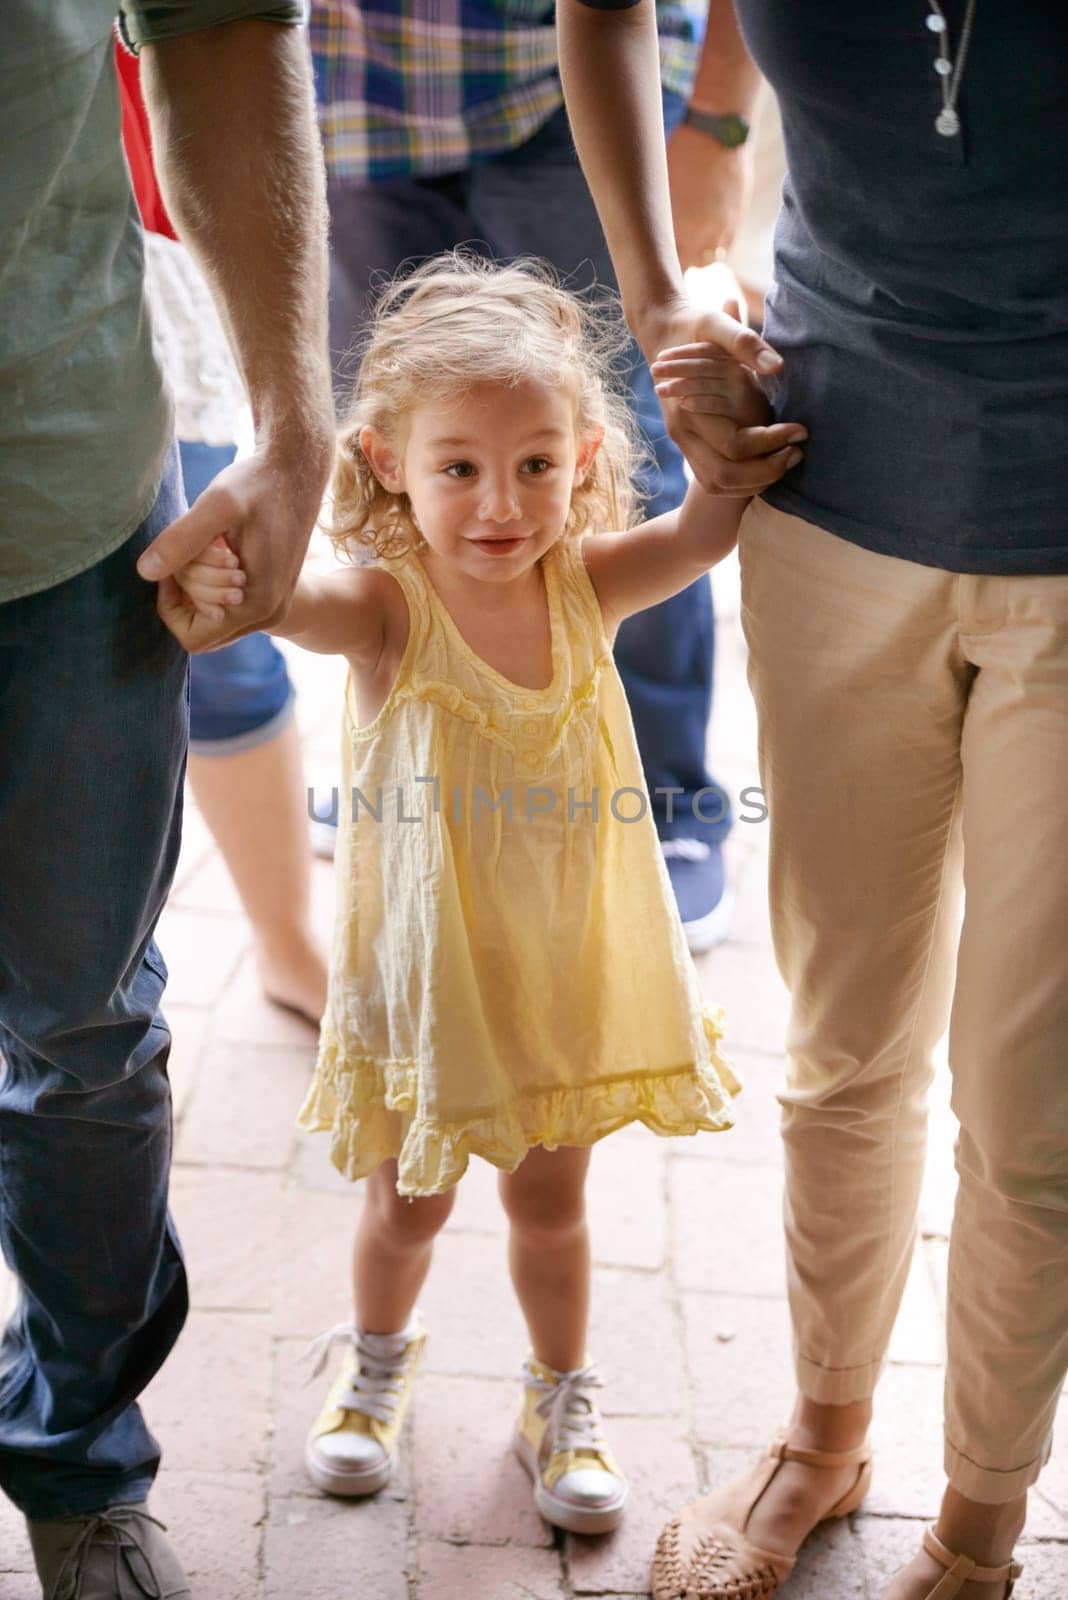 Happy, young girl and family holding hands for travel, fun adventure or holiday weekend in nature. Excited child, mom and dad walking outdoors for sightseeing, bonding and field trip together.